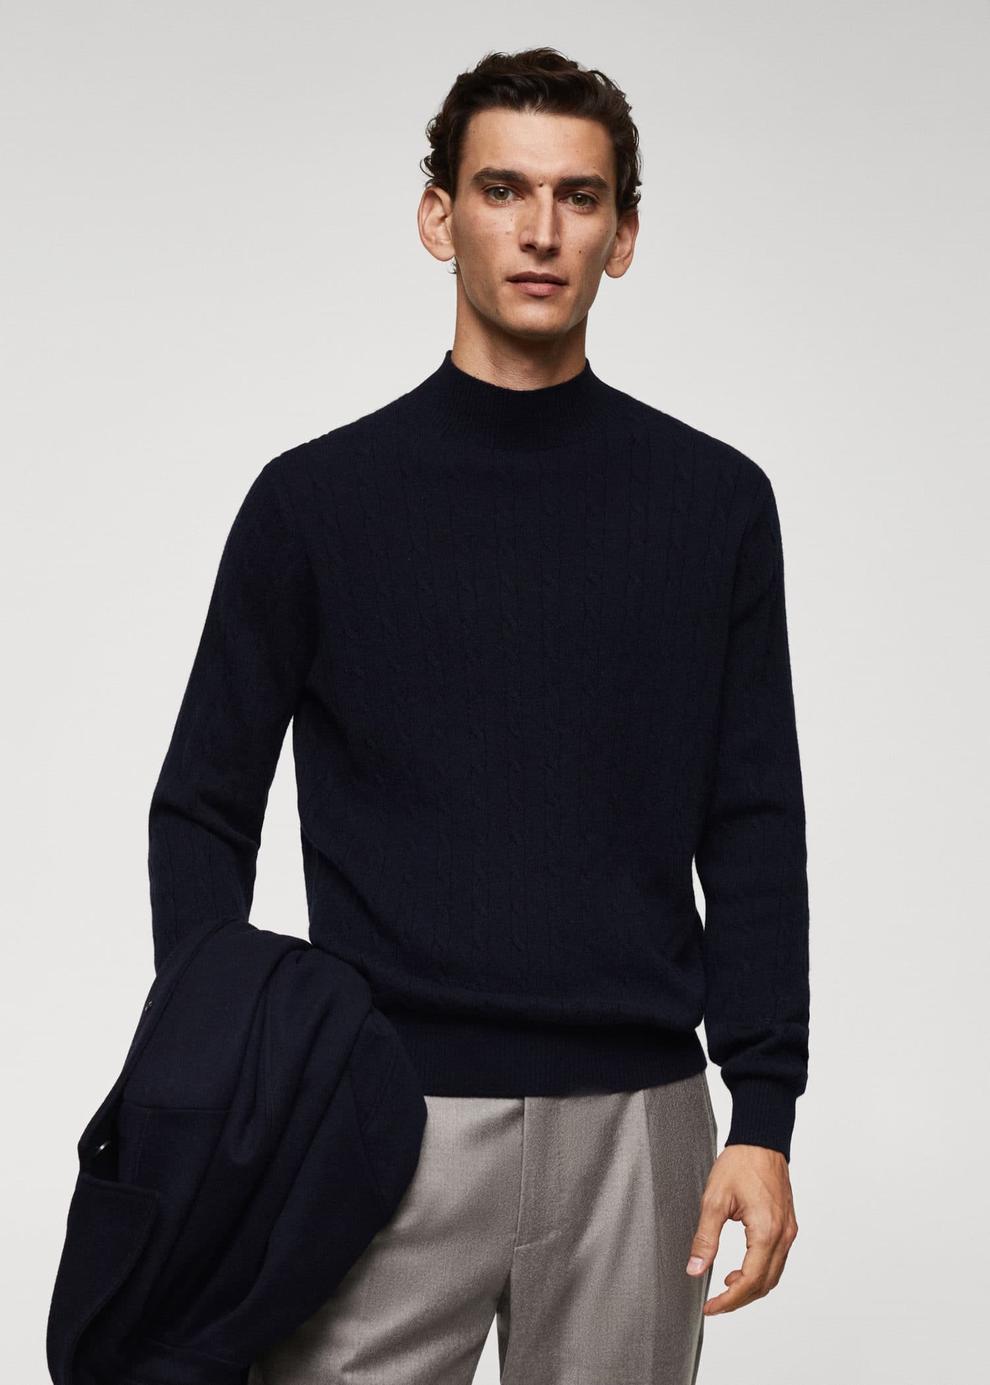 100% cashmere braided sweater offers at S$ 239.9 in HE by Mango